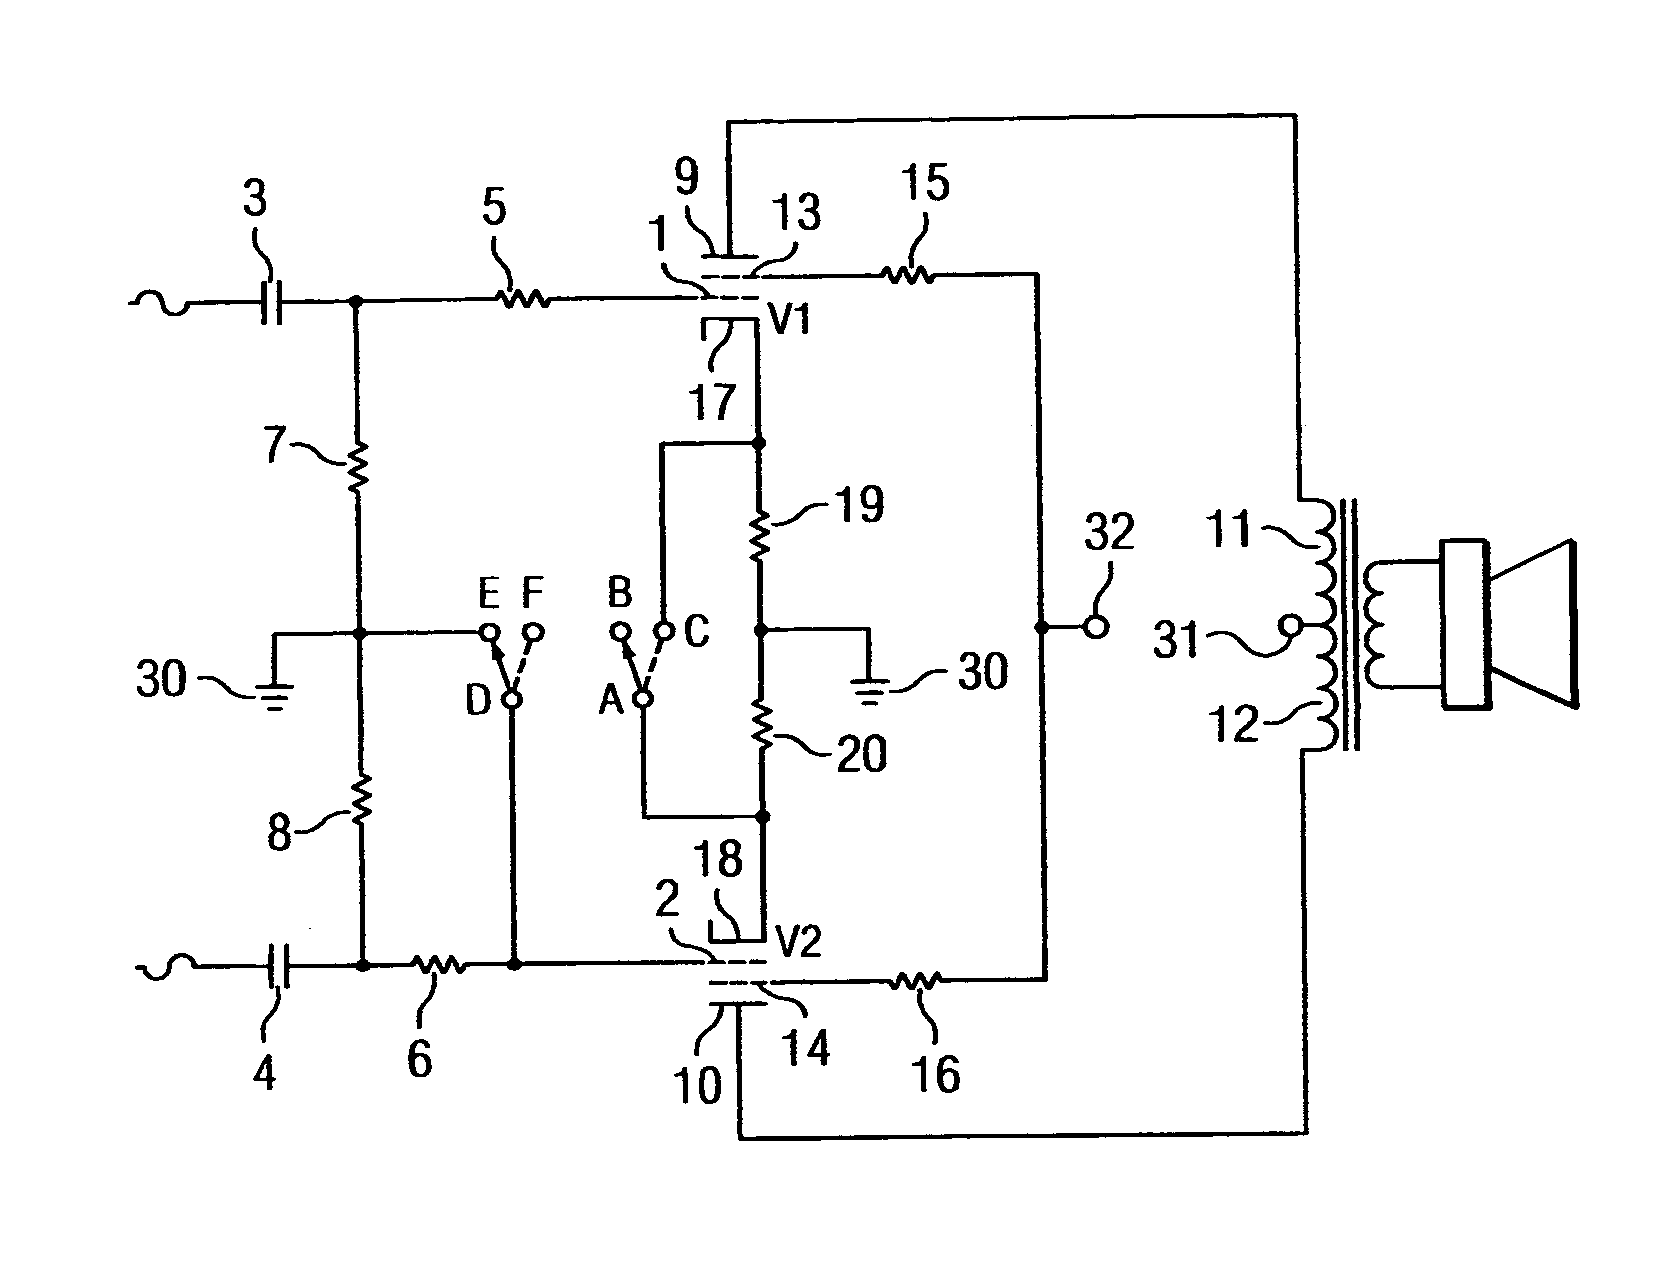 Vacuum tube power amplifier switchable between push-pull and single ended configurations